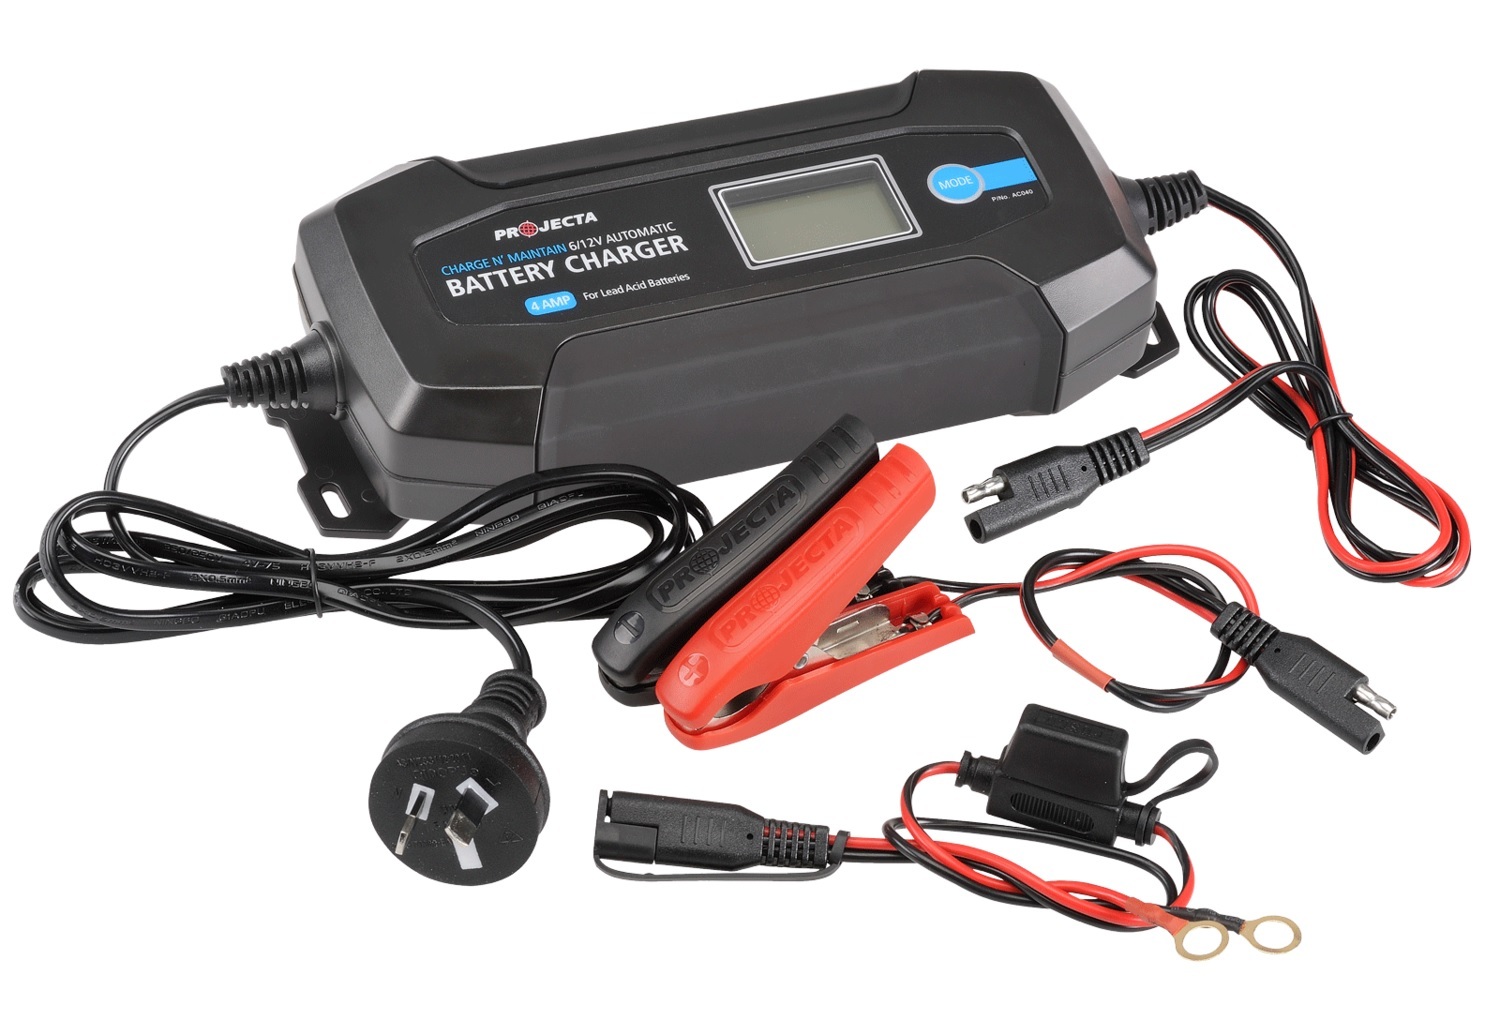 Projecta 4.0 Smart Battery Charger 4.0A Output